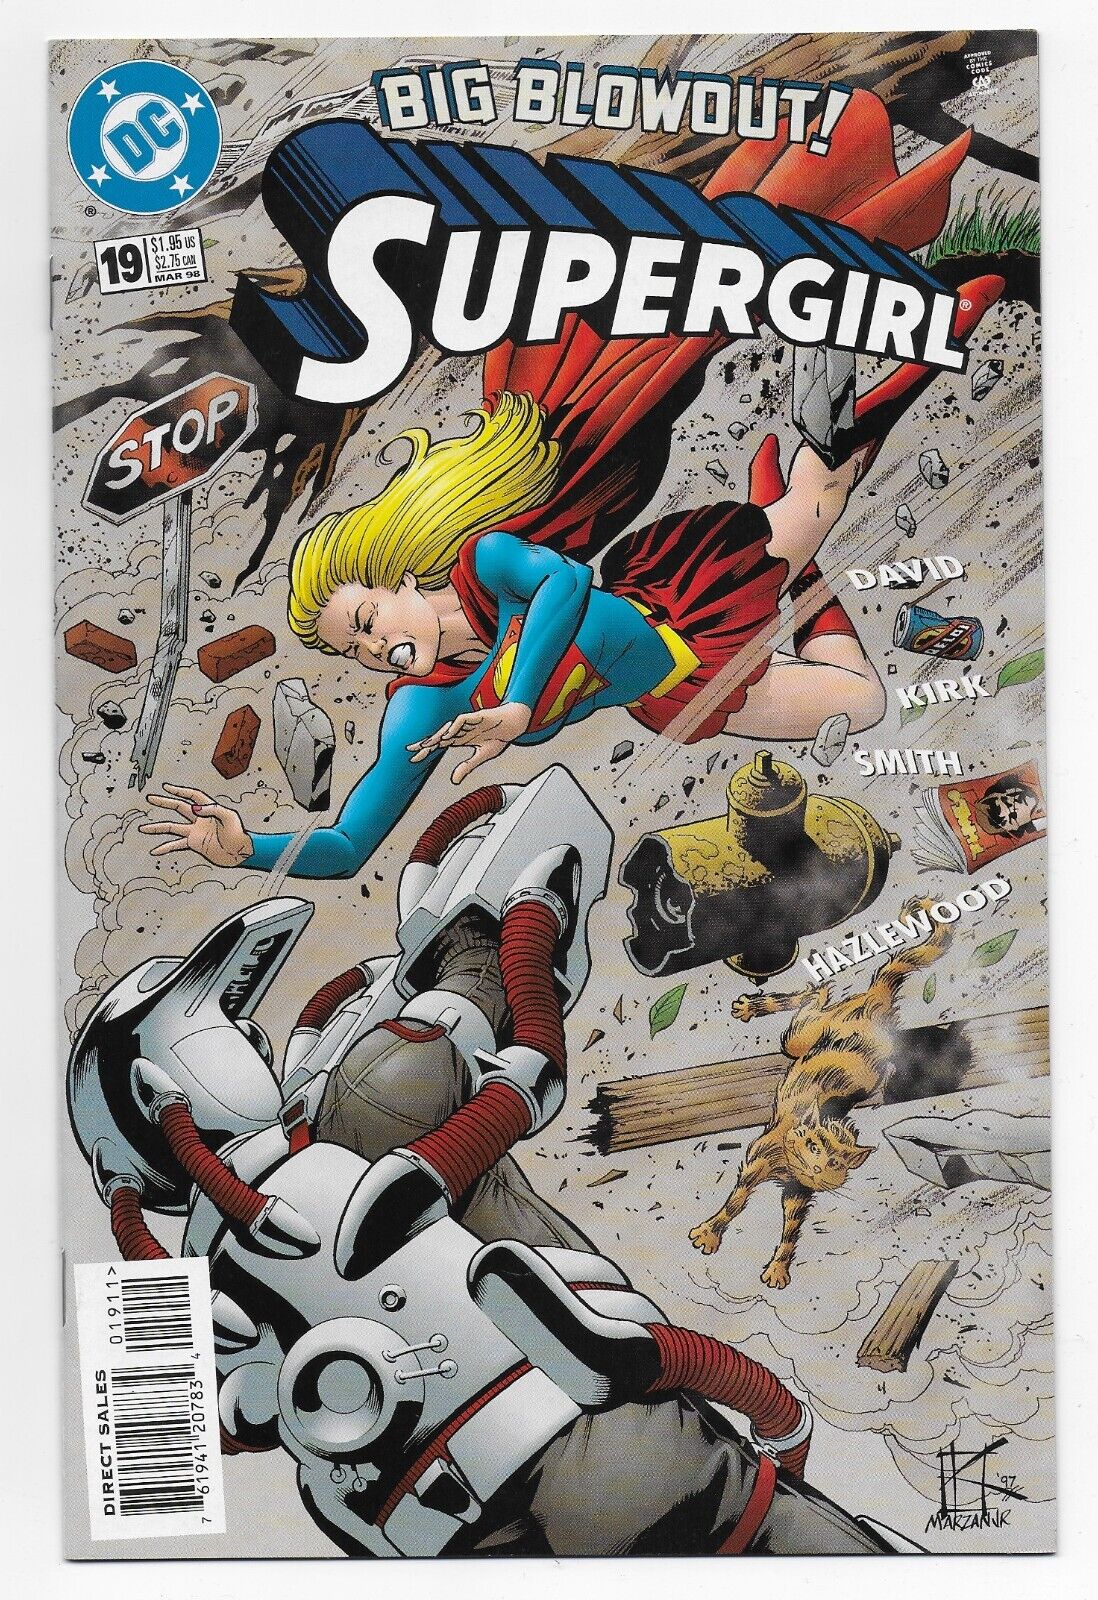 Supergirl #19 BIG BLOWOUT DC 1998 Bagged & Boarded We Combine Shipping